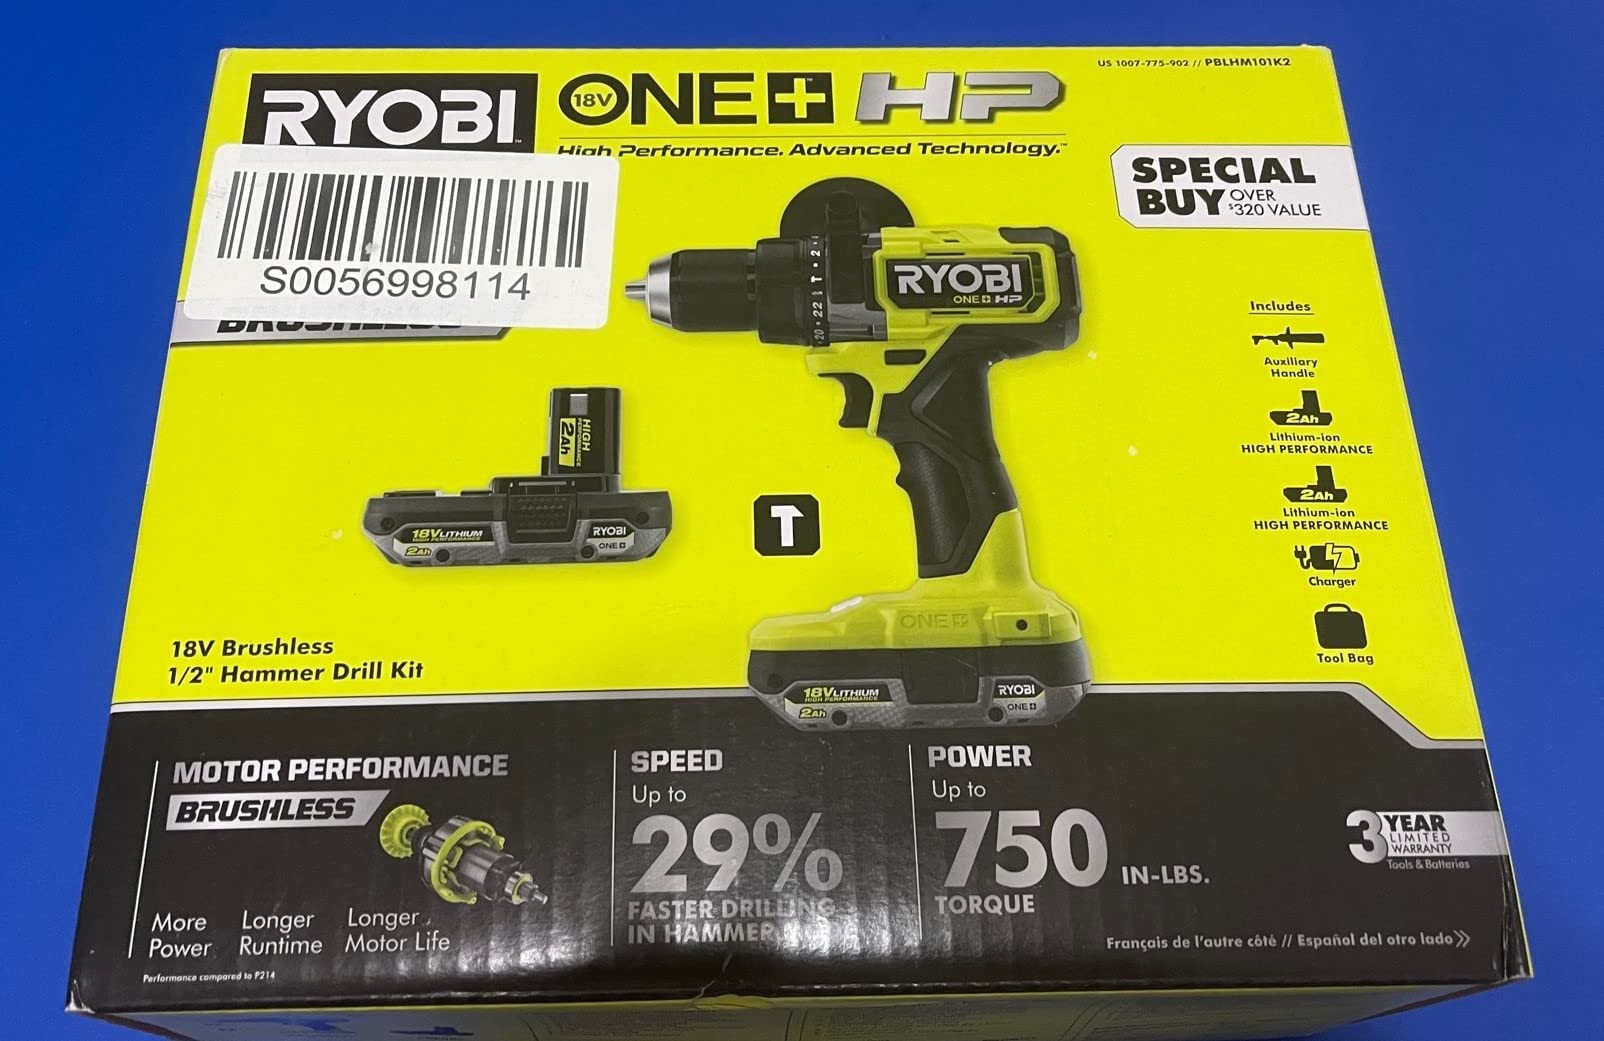 RYOBI ONE+ HP 18V Brushless Cordless 1/2 in. Hammer Drill Kit with (2) 2.0 Ah Batteries, Charger, and Bag (PBLHM101K2)